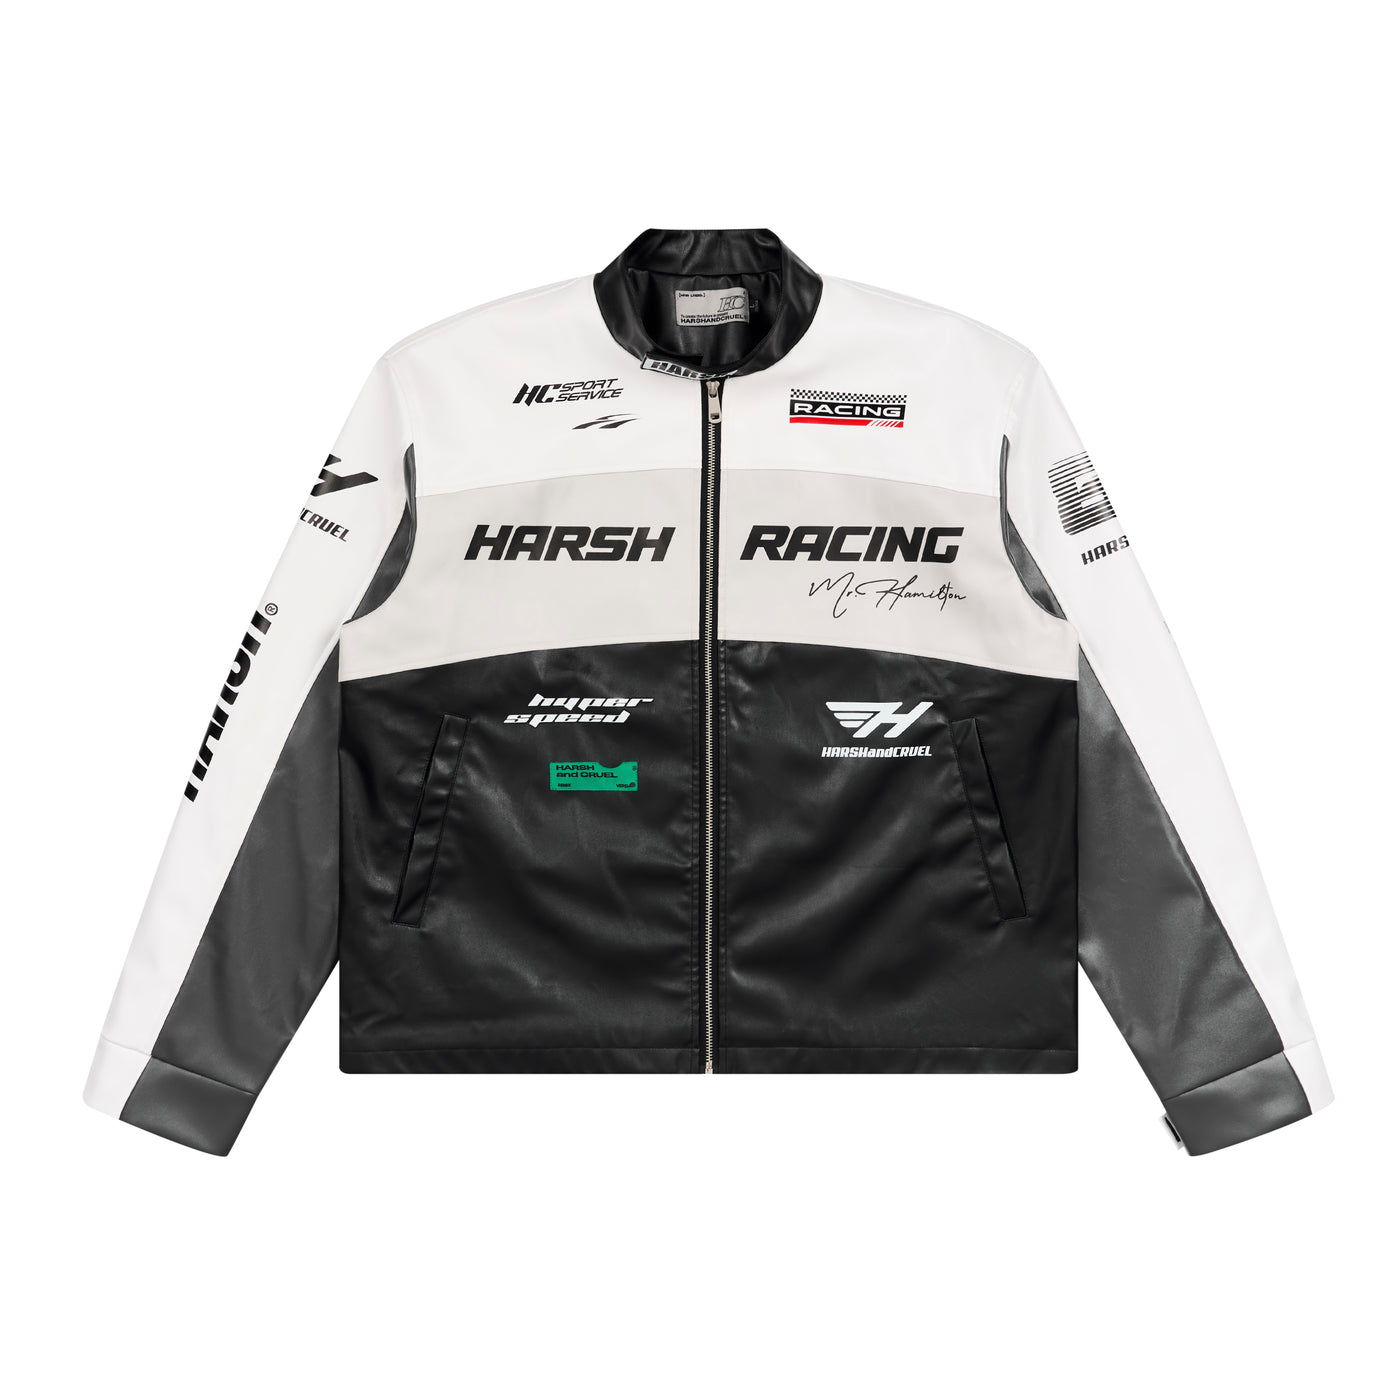 Harsh and Cruel Colorful Lapel F1 Racing Suit Faux Leather Jacket - The jacket features a colorful lapel design, inspired by F1 racing suits. It is made of faux leather material for a sleek, sporty look.